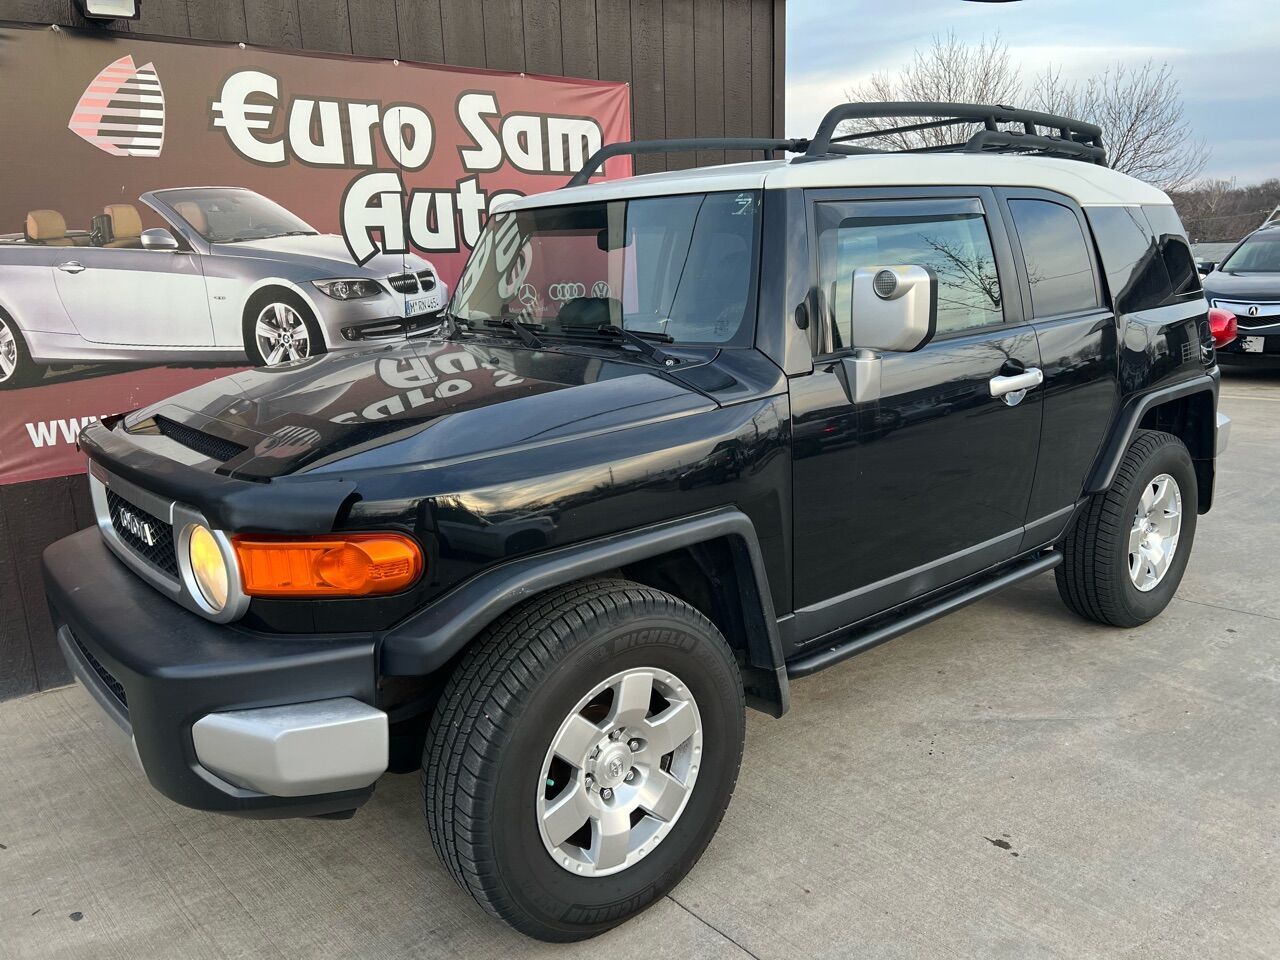 Toyota FJ Cruiser For Sale In Lees Summit, MO ®